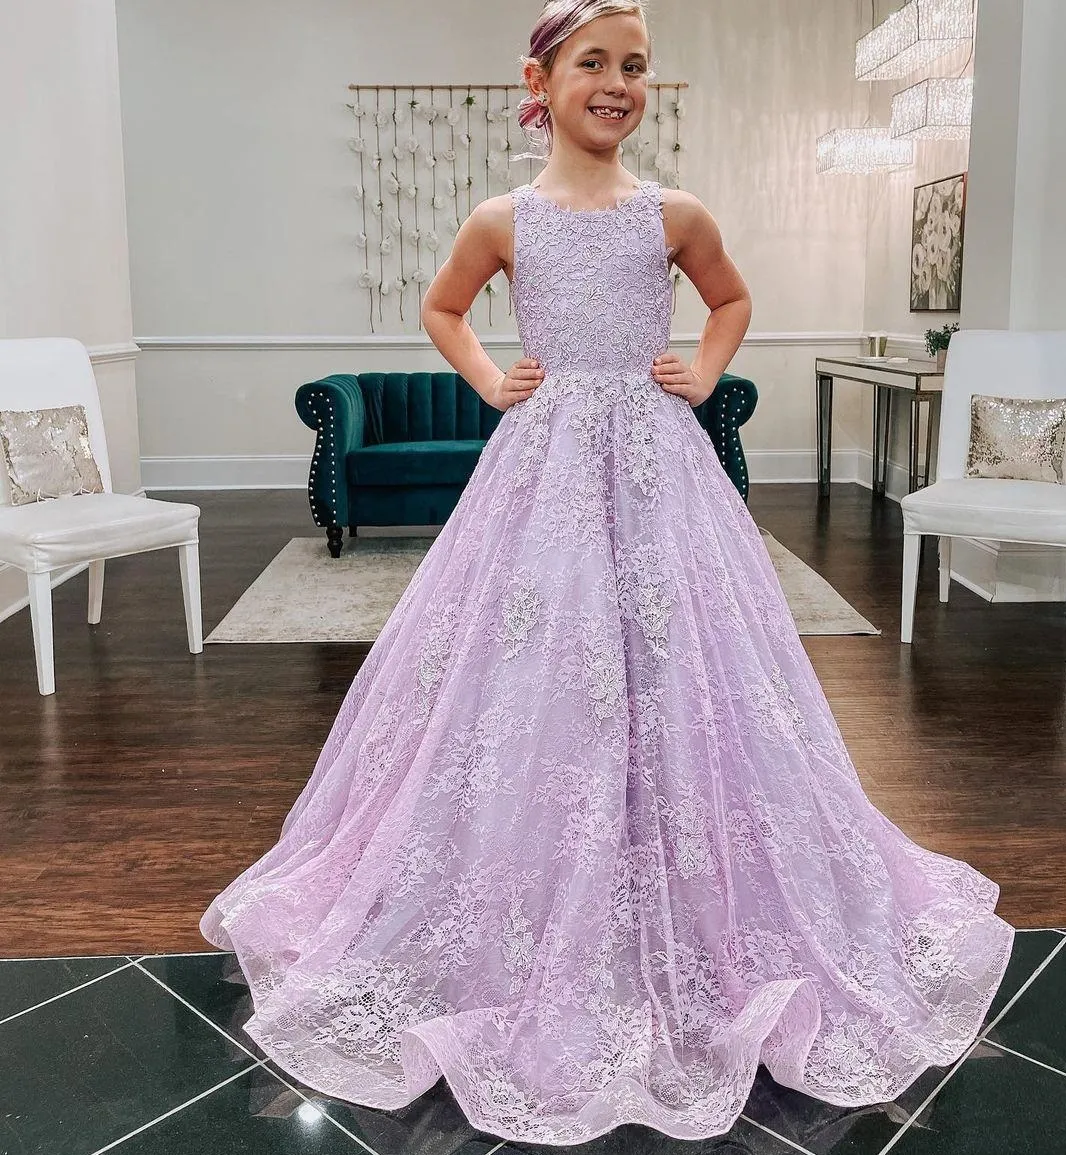 New Lilac Lace Flower Girls Dresses For Wedding Appliqued Toddler Pageant Gowns Long A Line First Communion Dress